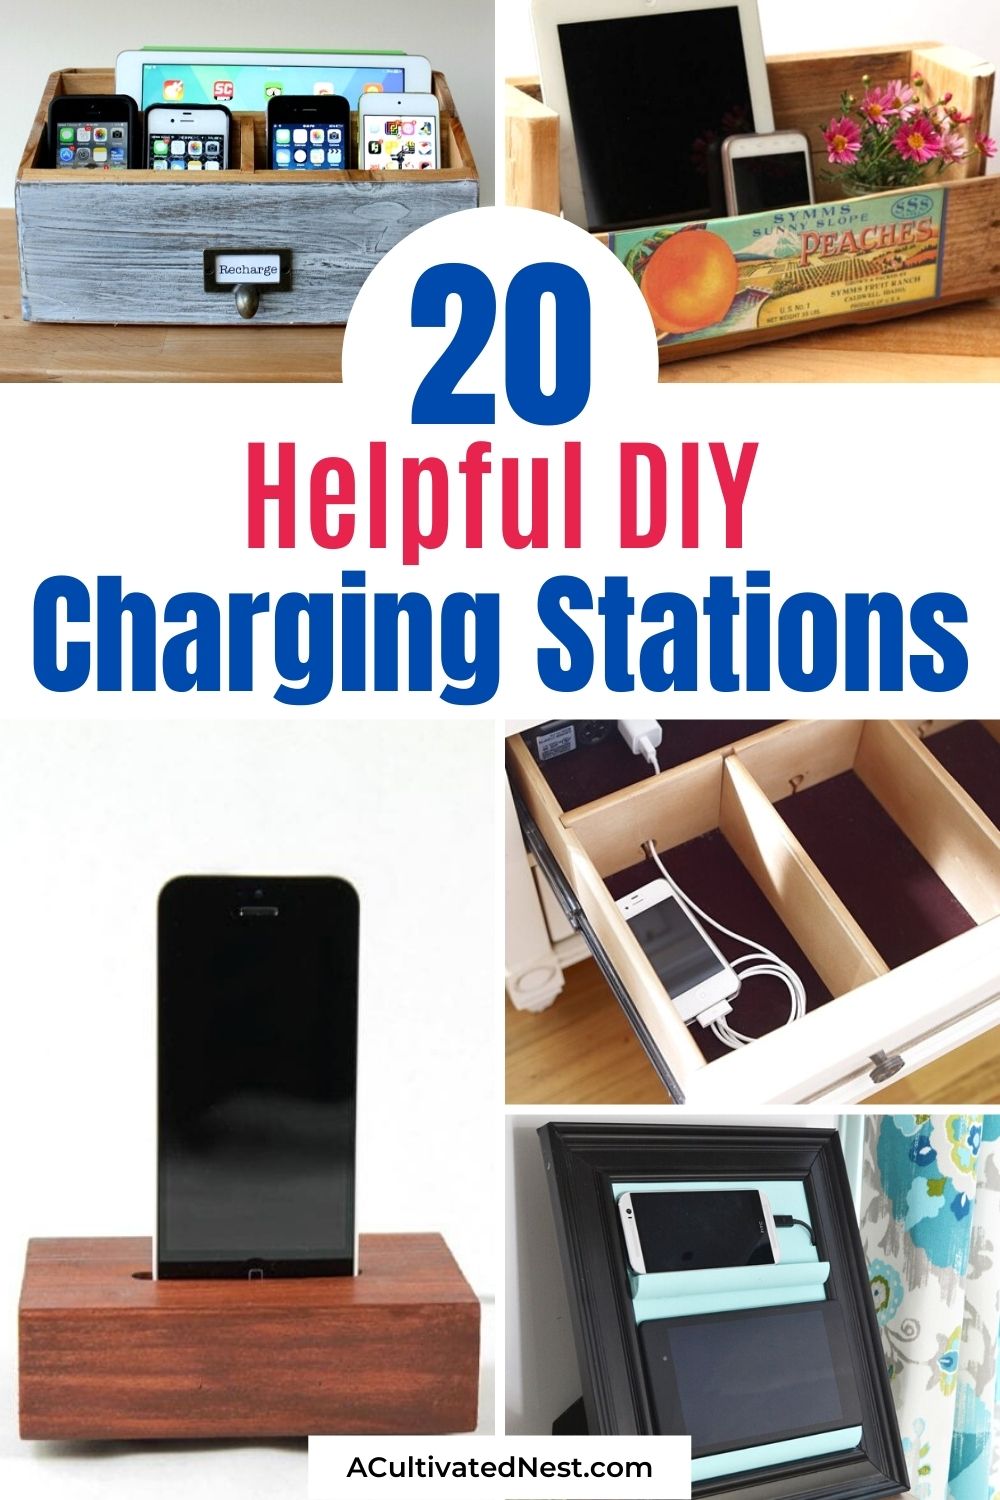 20 Helpful DIY Charging Stations- You can easily organize all your devices and your charging cords with these helpful DIY charging stations! They're so useful, and so easy to make! | #diyOrganizer #organizing #diyChargingStations #cordOrganization #ACultivatedNest